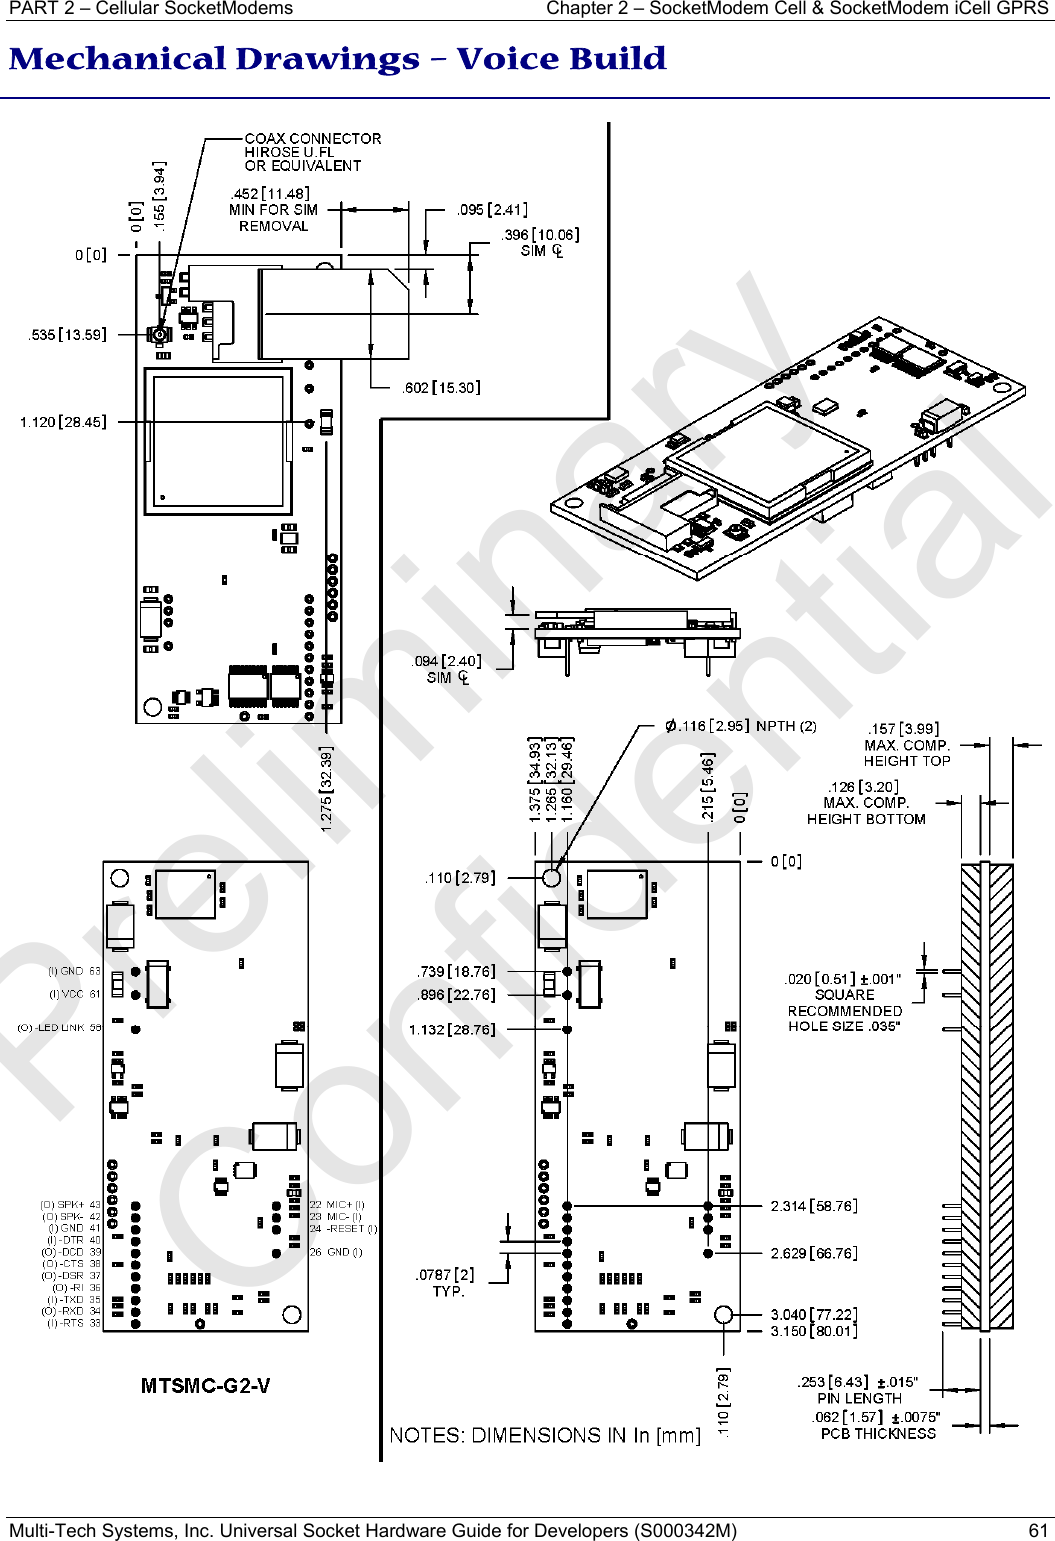 PART 2 – Cellular SocketModems   Chapter 2 – SocketModem Cell &amp; SocketModem iCell GPRS Multi-Tech Systems, Inc. Universal Socket Hardware Guide for Developers (S000342M)  61   Mechanical Drawings – Voice Build  Preliminary  Confidential